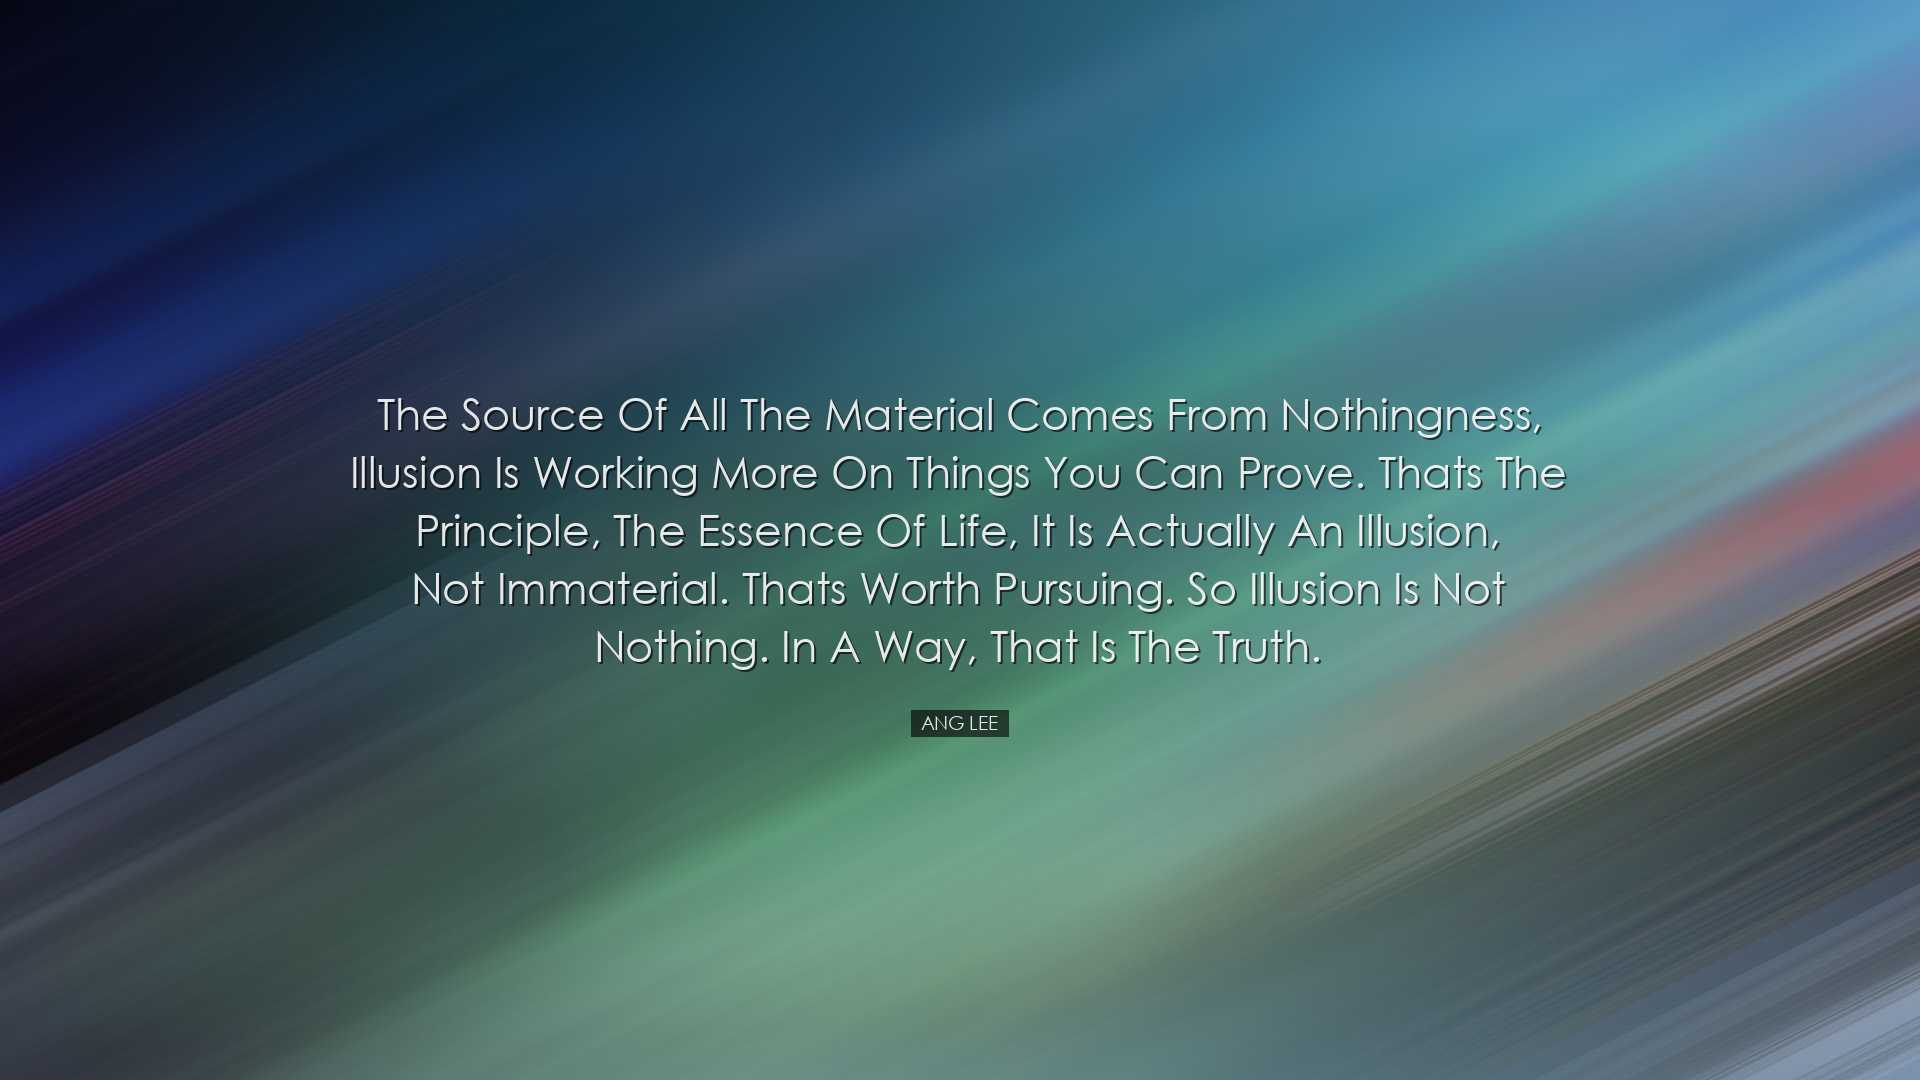 The source of all the material comes from nothingness, illusion is